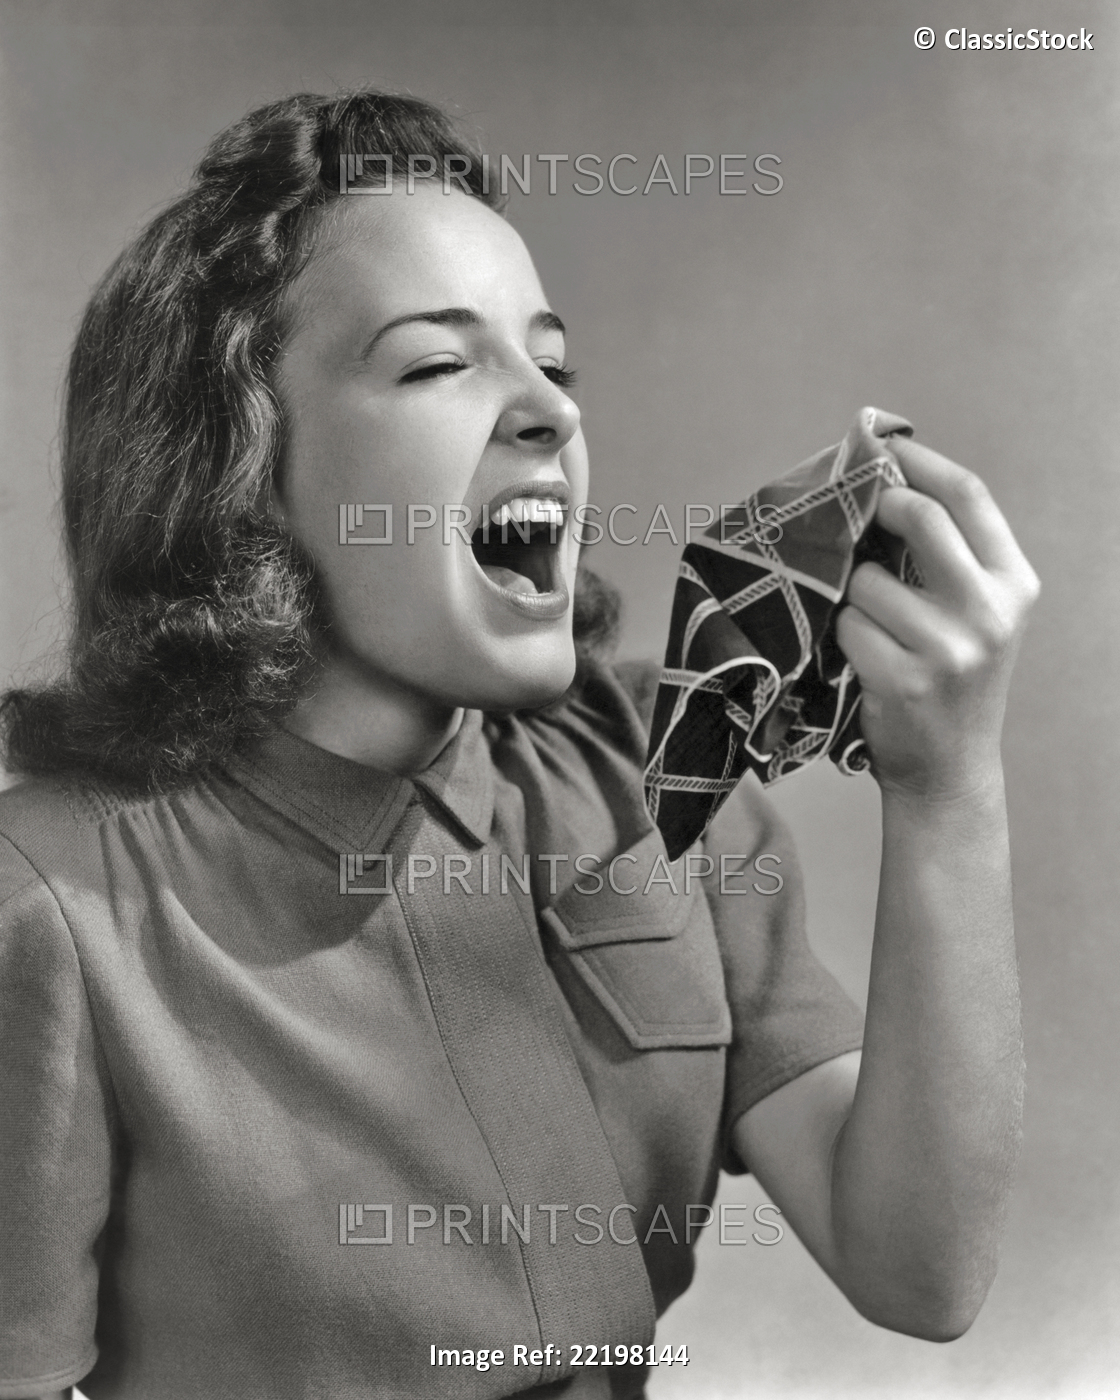 1940s 1940s TEEN GIRL ABOUT TO SNEEZE HOLDING HANKY HANDKERCHIEF READY